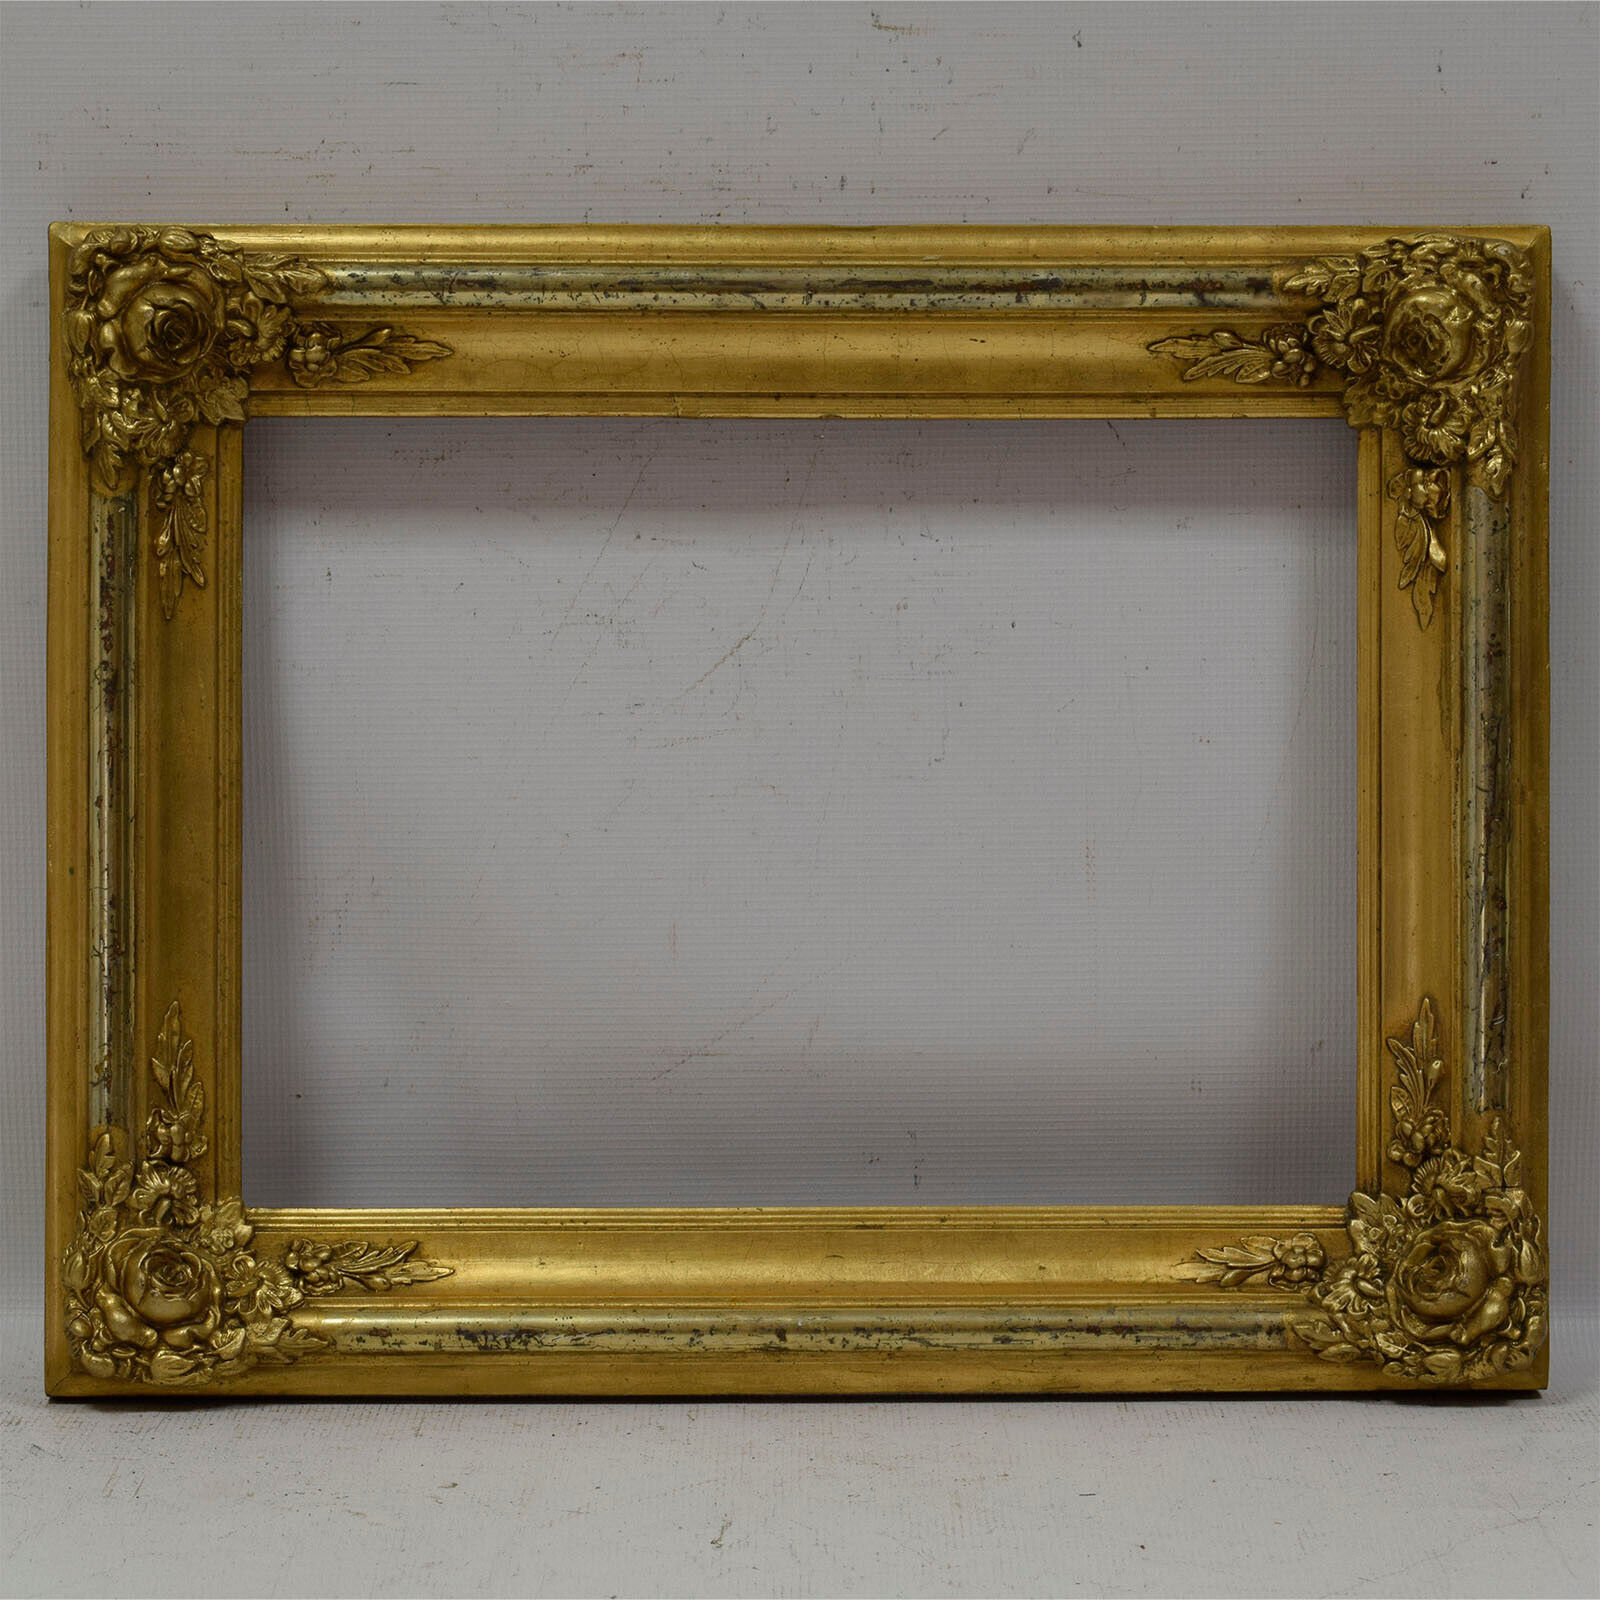 Ca. 1880-1900 Old wooden frame original condition Internal: 17.1x12,5 in